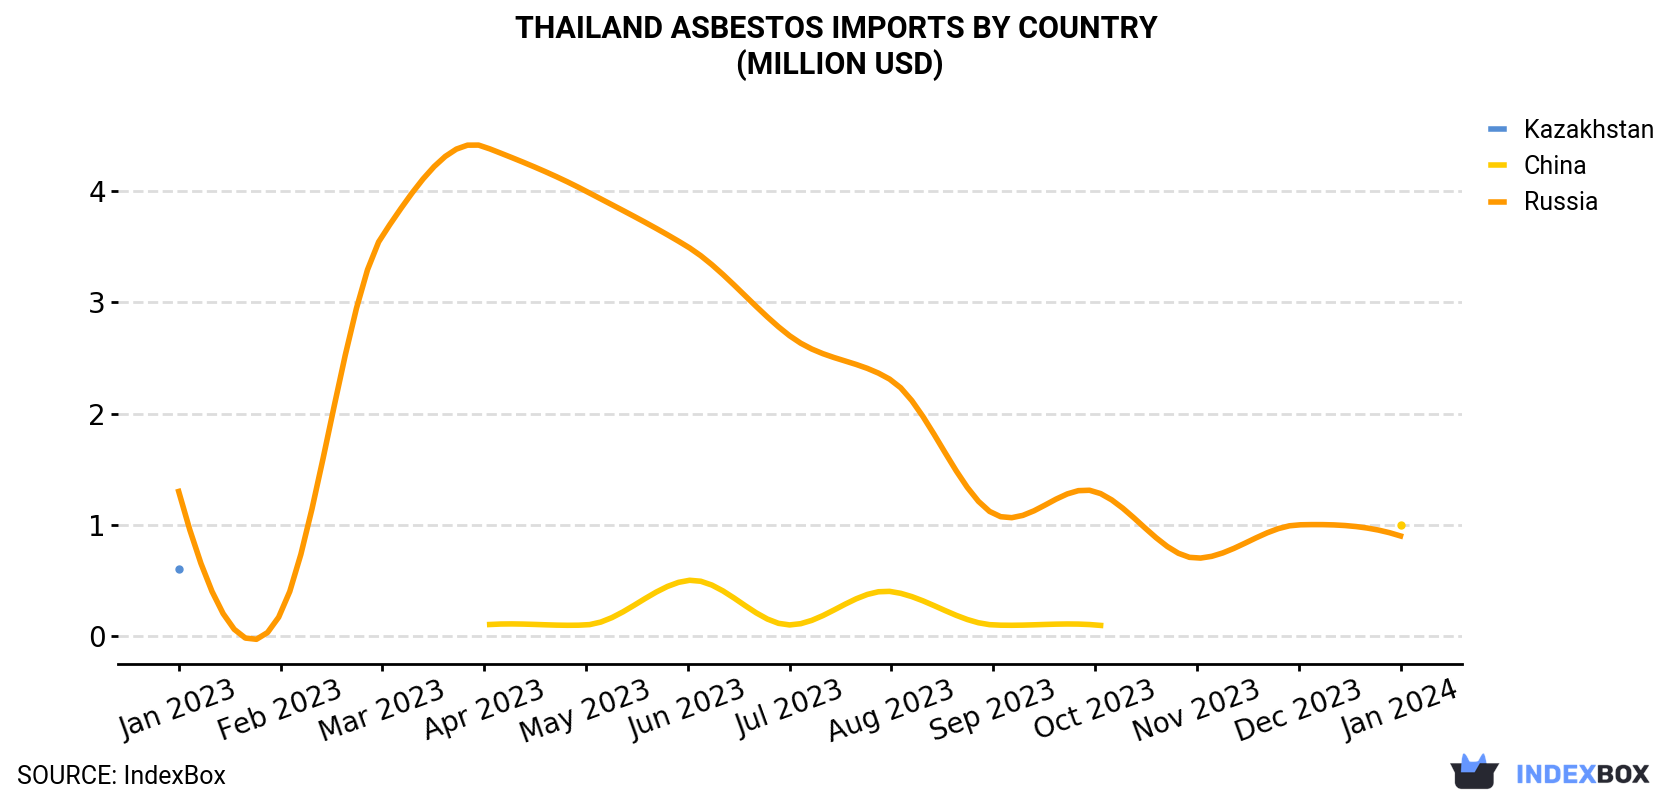 Thailand Asbestos Imports By Country (Million USD)